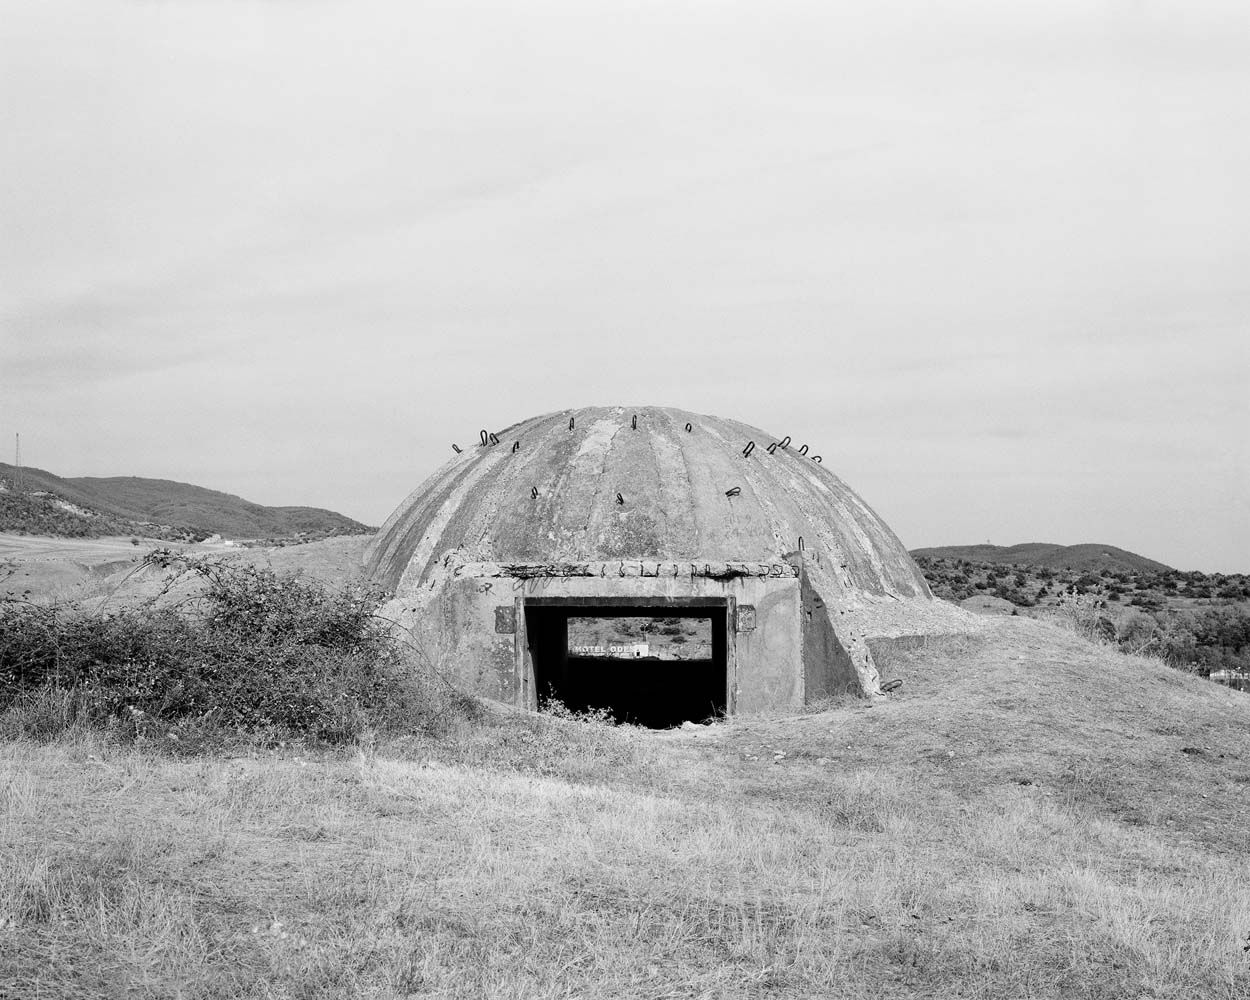 A command-and-control bunker, known as Pike Zjarri ("firing point") or PZ, in Bilisht, close to the border with Greece. 